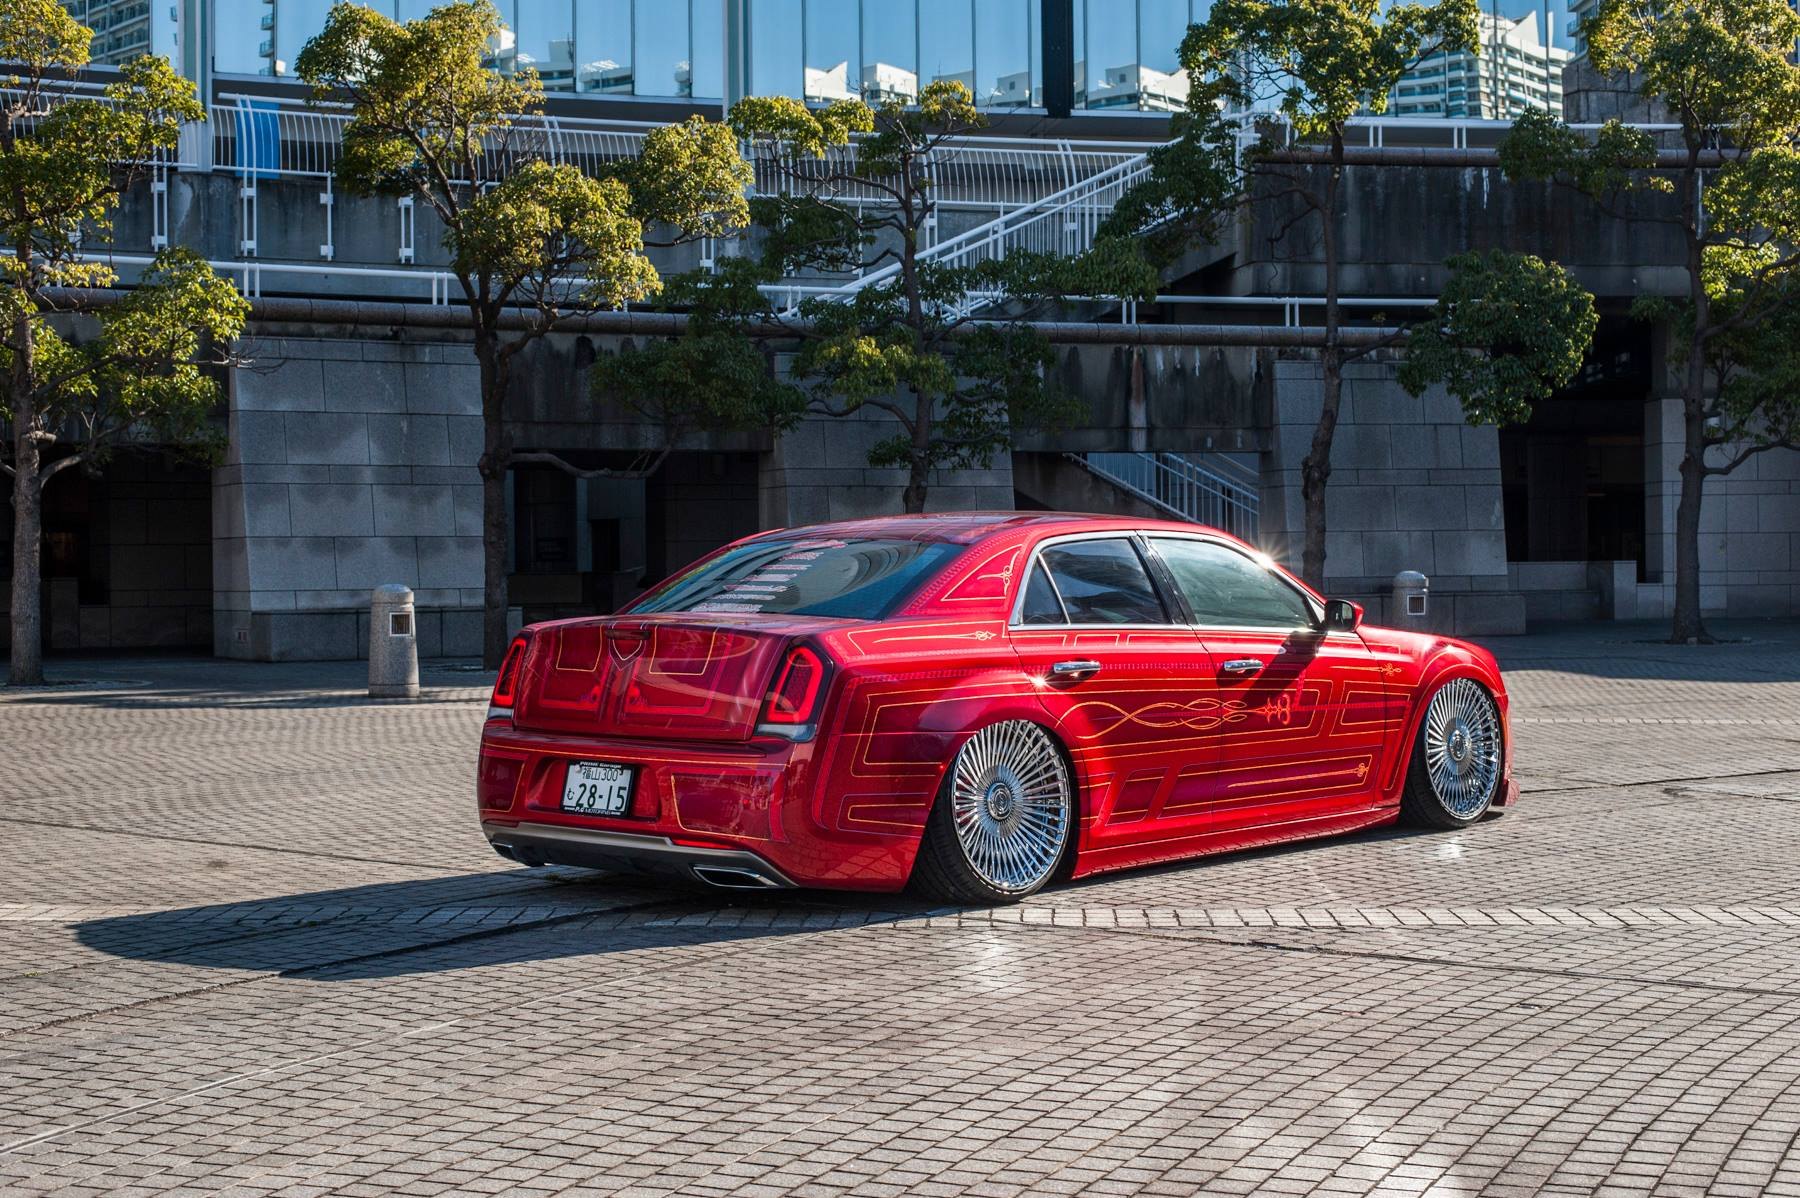 Aftermarket Rear Diffuser on Red Lowered Chrysler 300 - Photo by Lexani